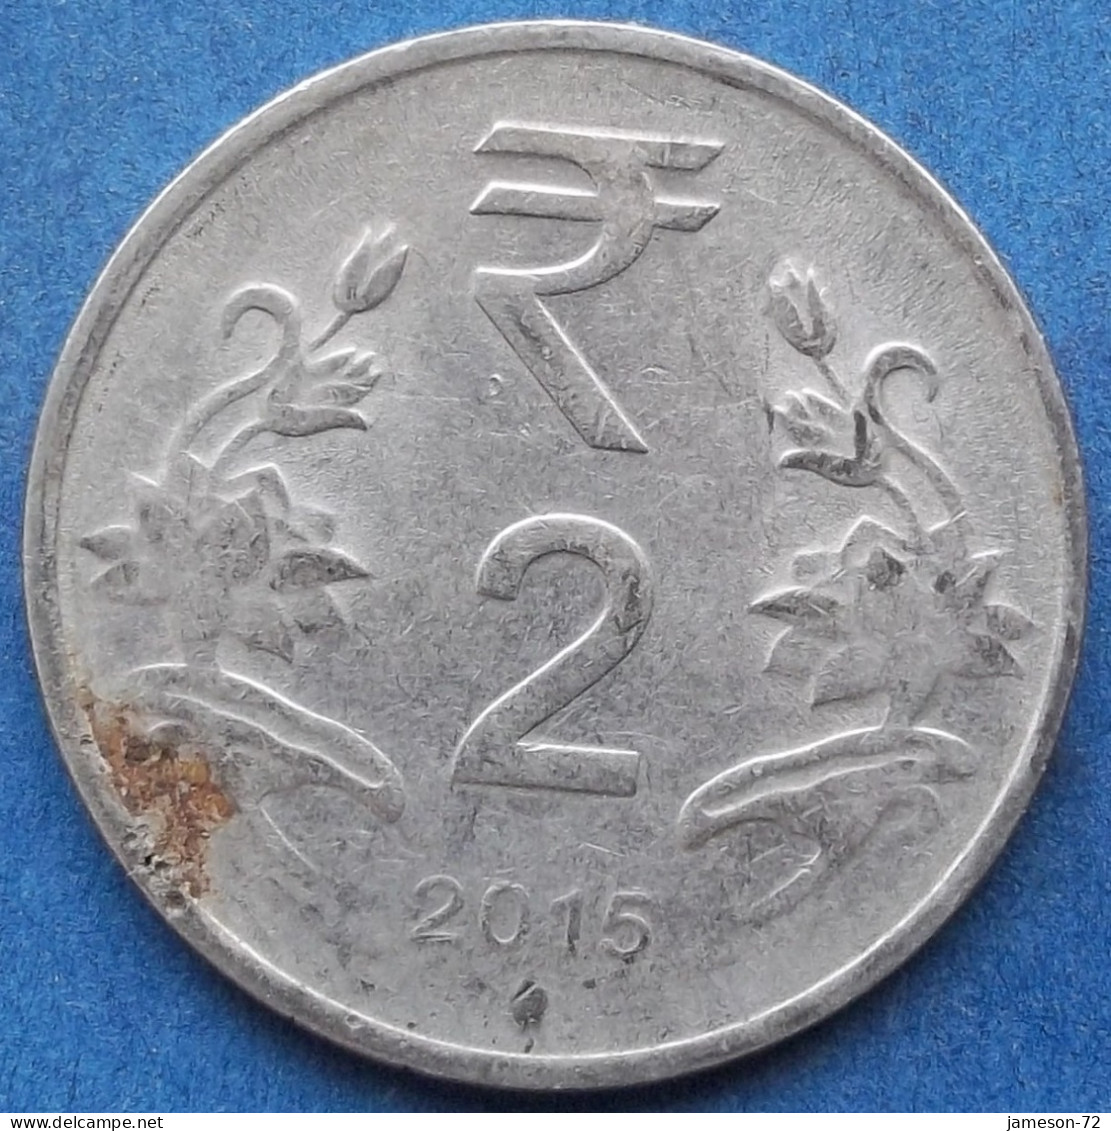 INDIA - 2 Rupees 2015 "Lotus Flowers" KM# 395 Republic Decimal Coinage (1957) - Edelweiss Coins - Georgia